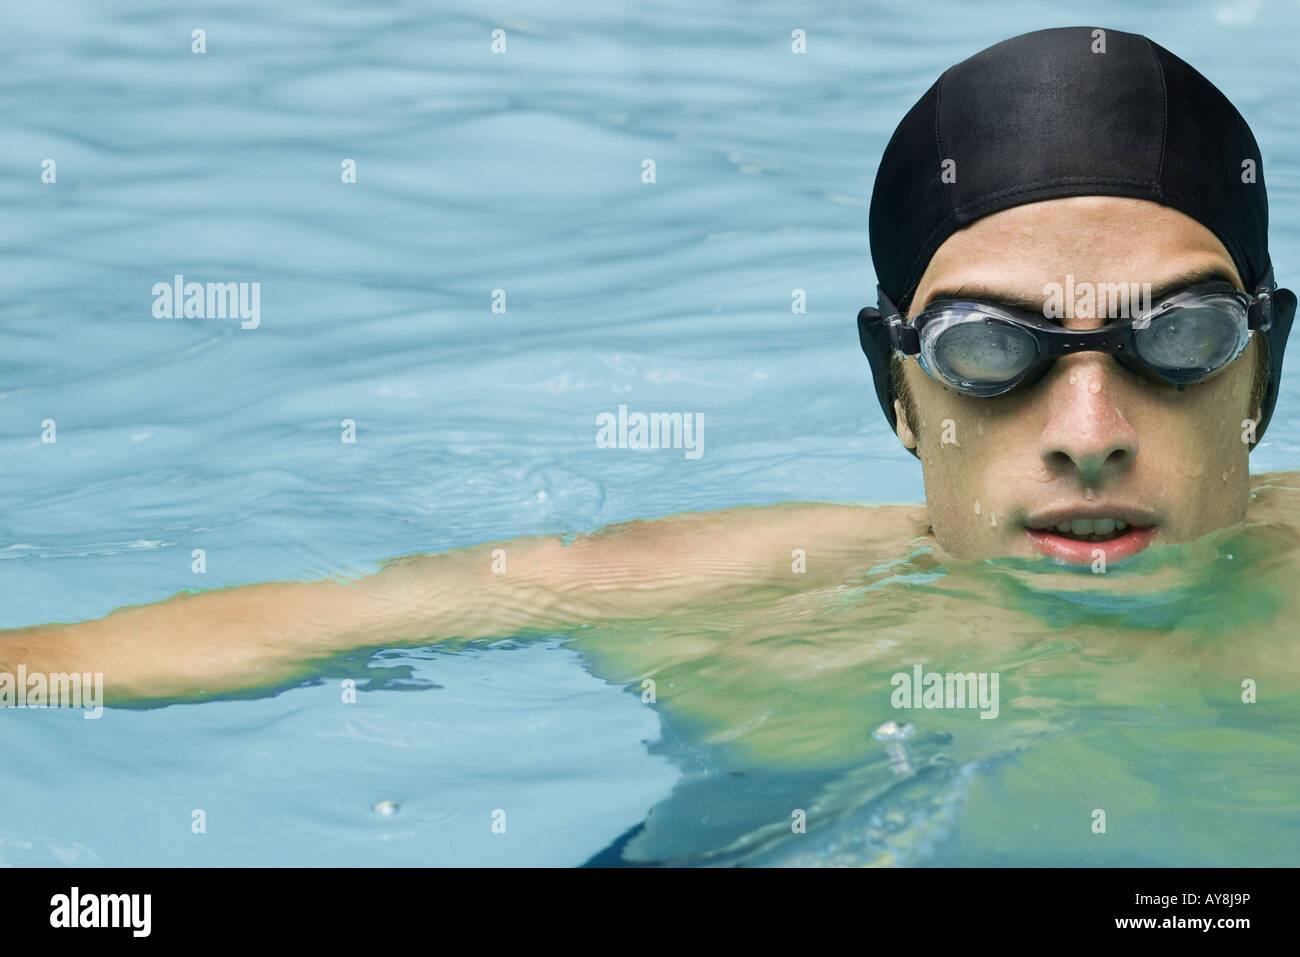 Man in swimming pool wearing goggles and bathing cap, looking at camera, close-up Stock Photo